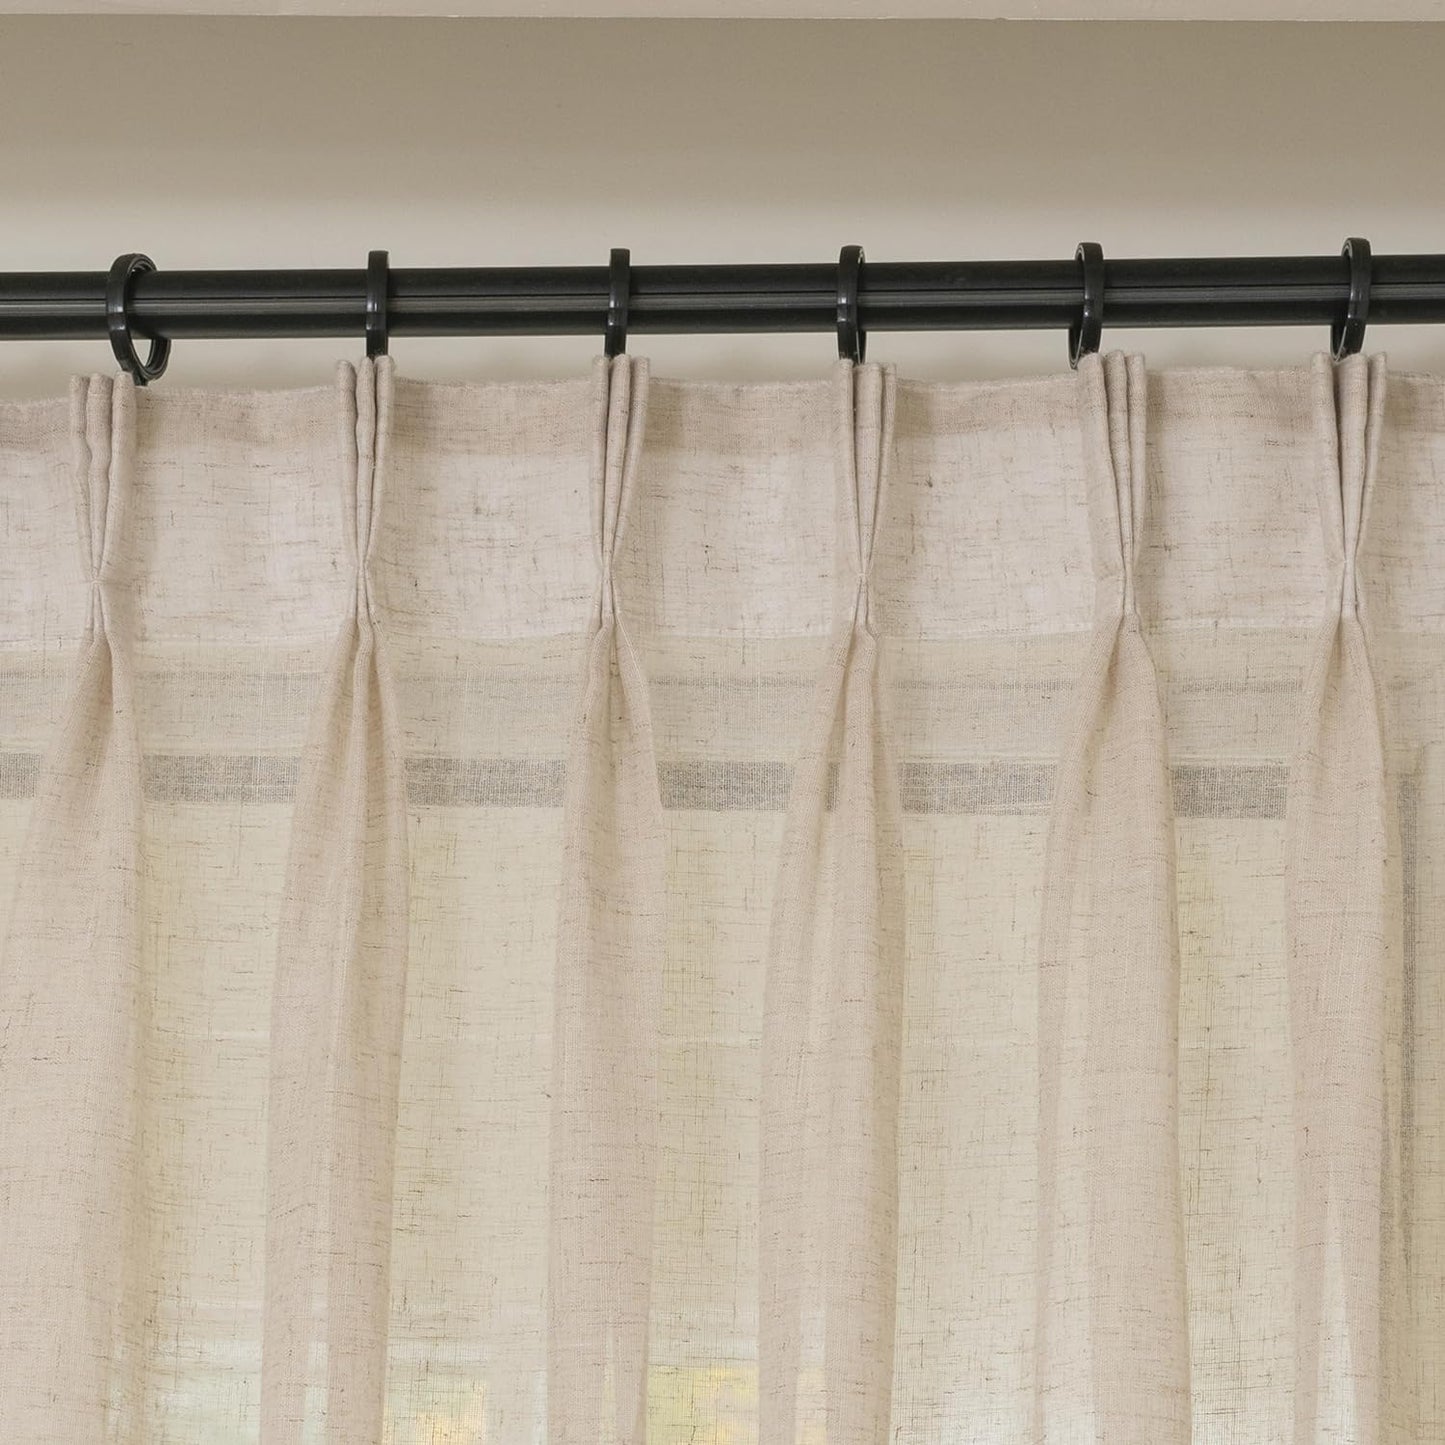 Faux Linen like Triple Pinch Pleated French Pleats 54 Inches Long Sheer Curtains Window Treatment Voile Fabric Drapes Living Room Kitchen (Linen Colour, 36W X 54L (2 Panels))  SL Linen Colour 60W X 84L (2 Panels) 